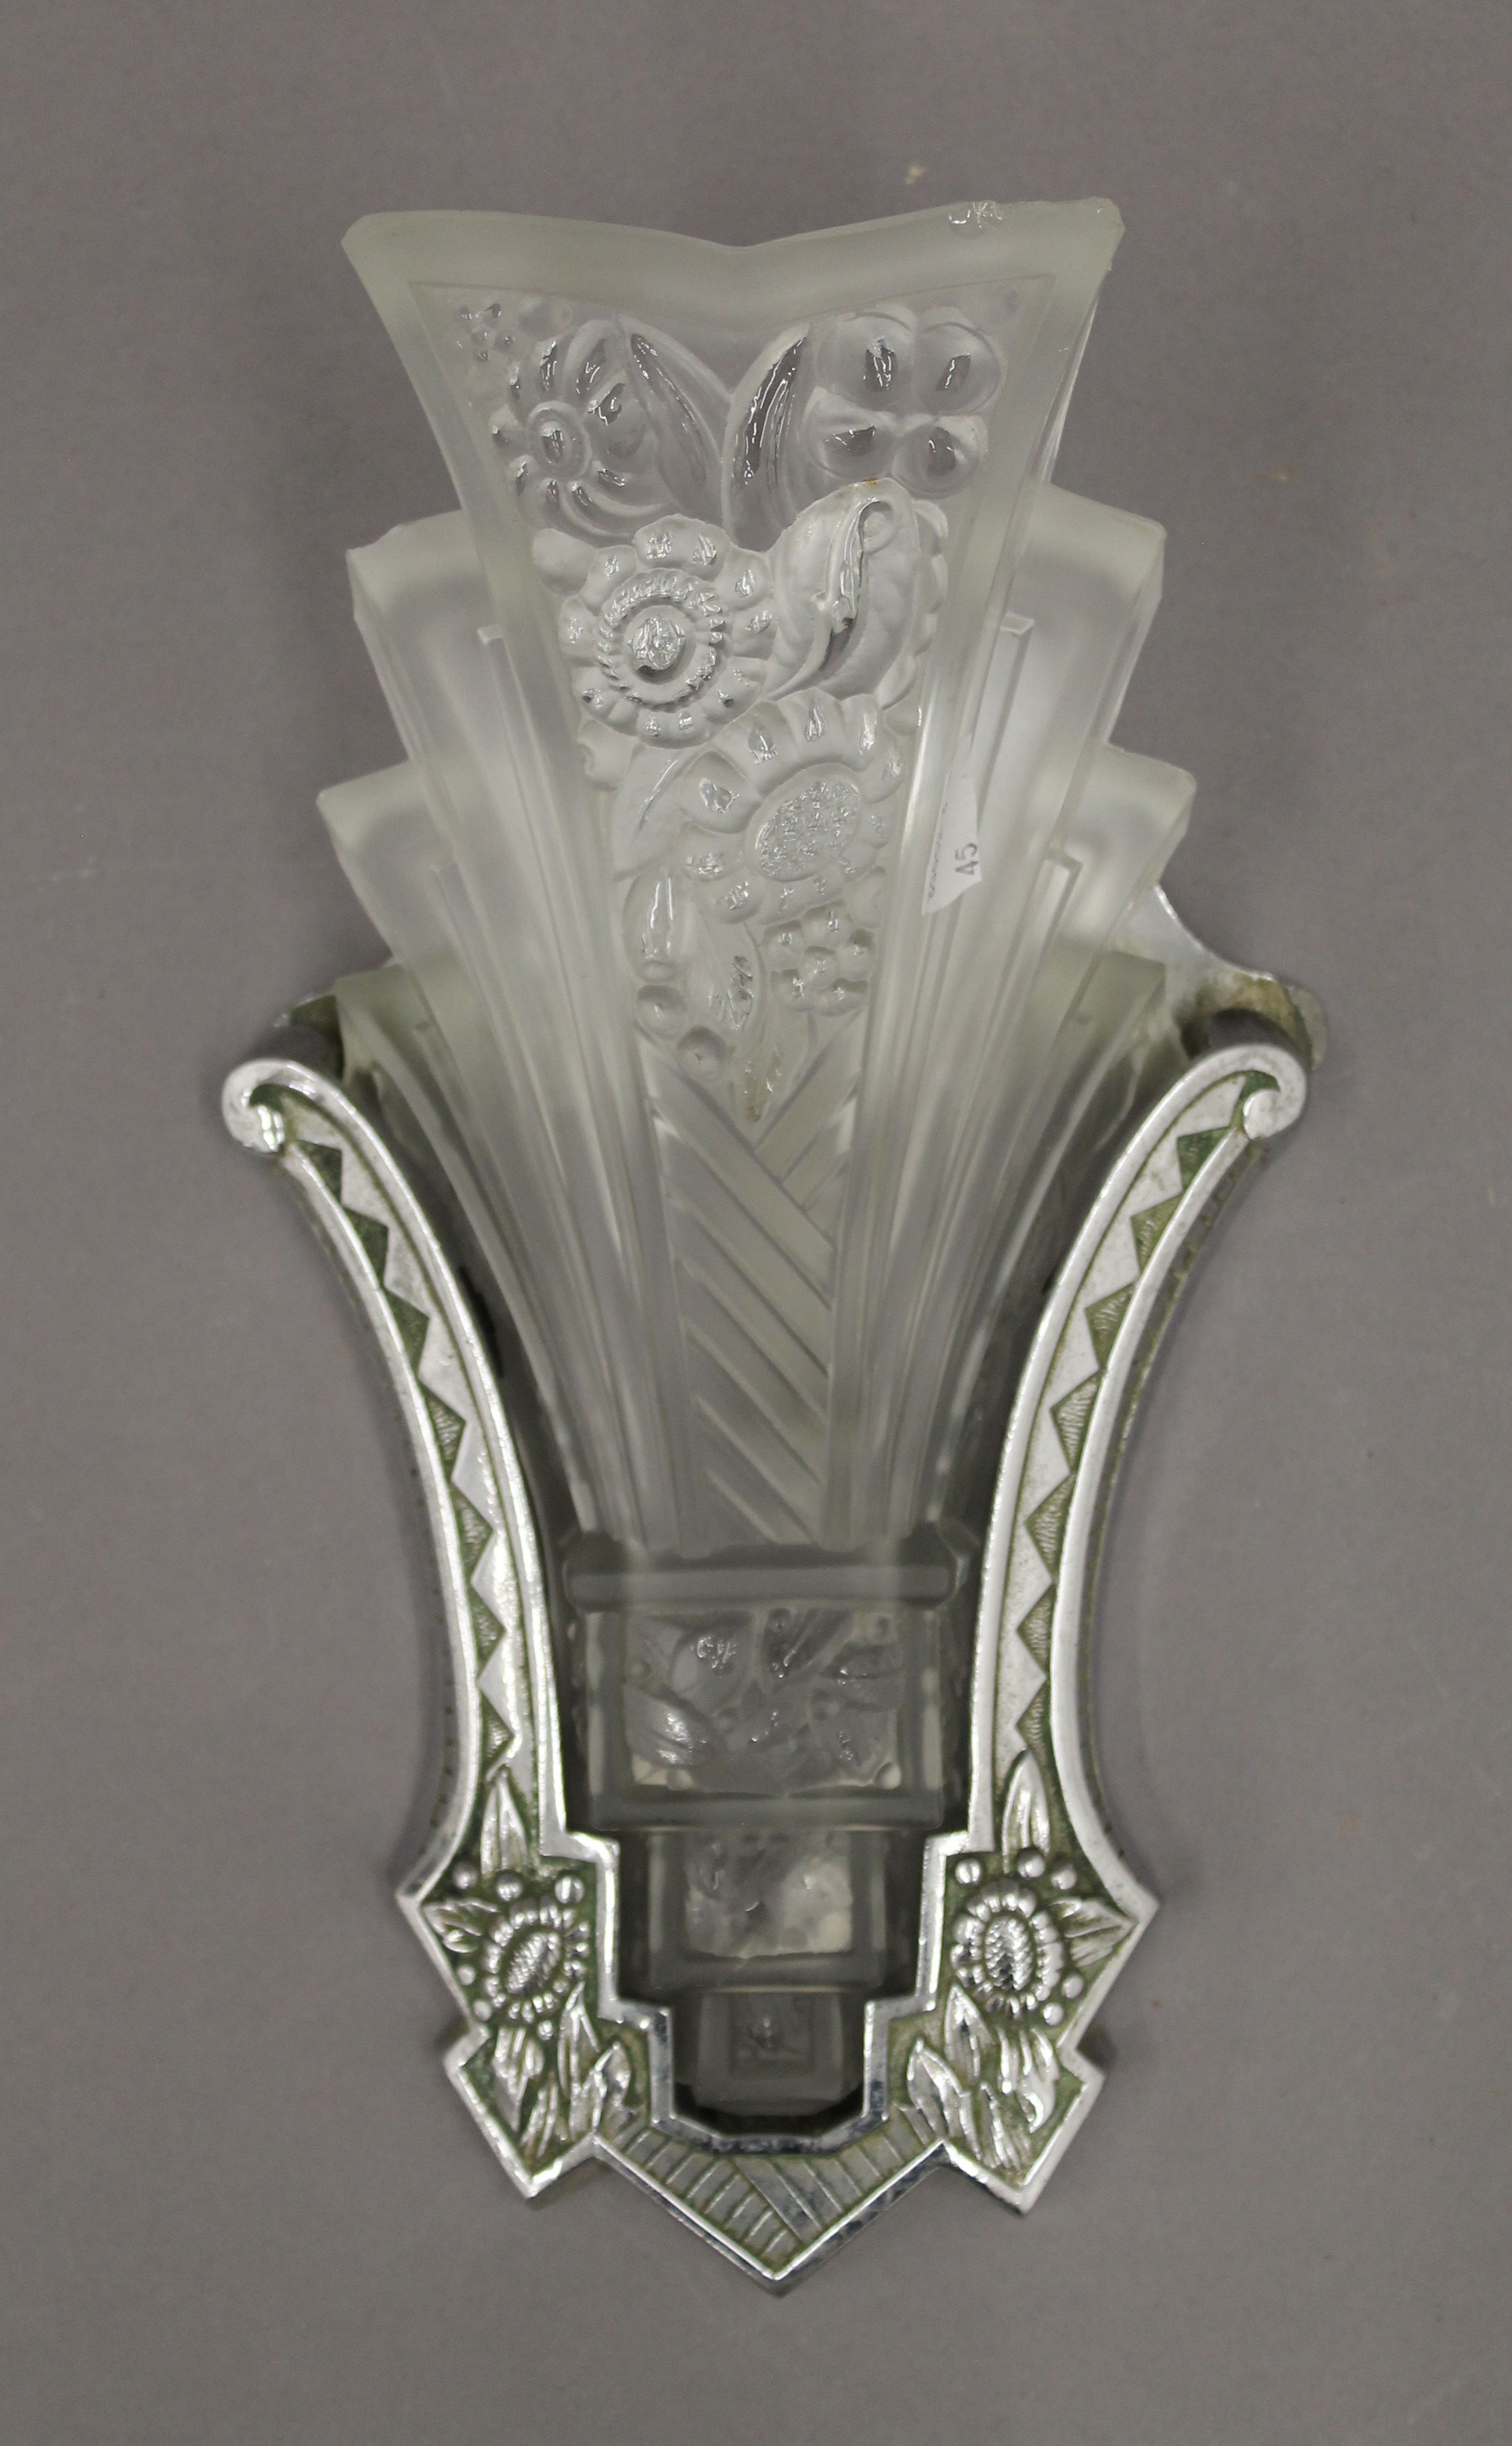 Two Art Deco glass and chrome wall lights. Each approximately 30 cm high. - Image 2 of 3